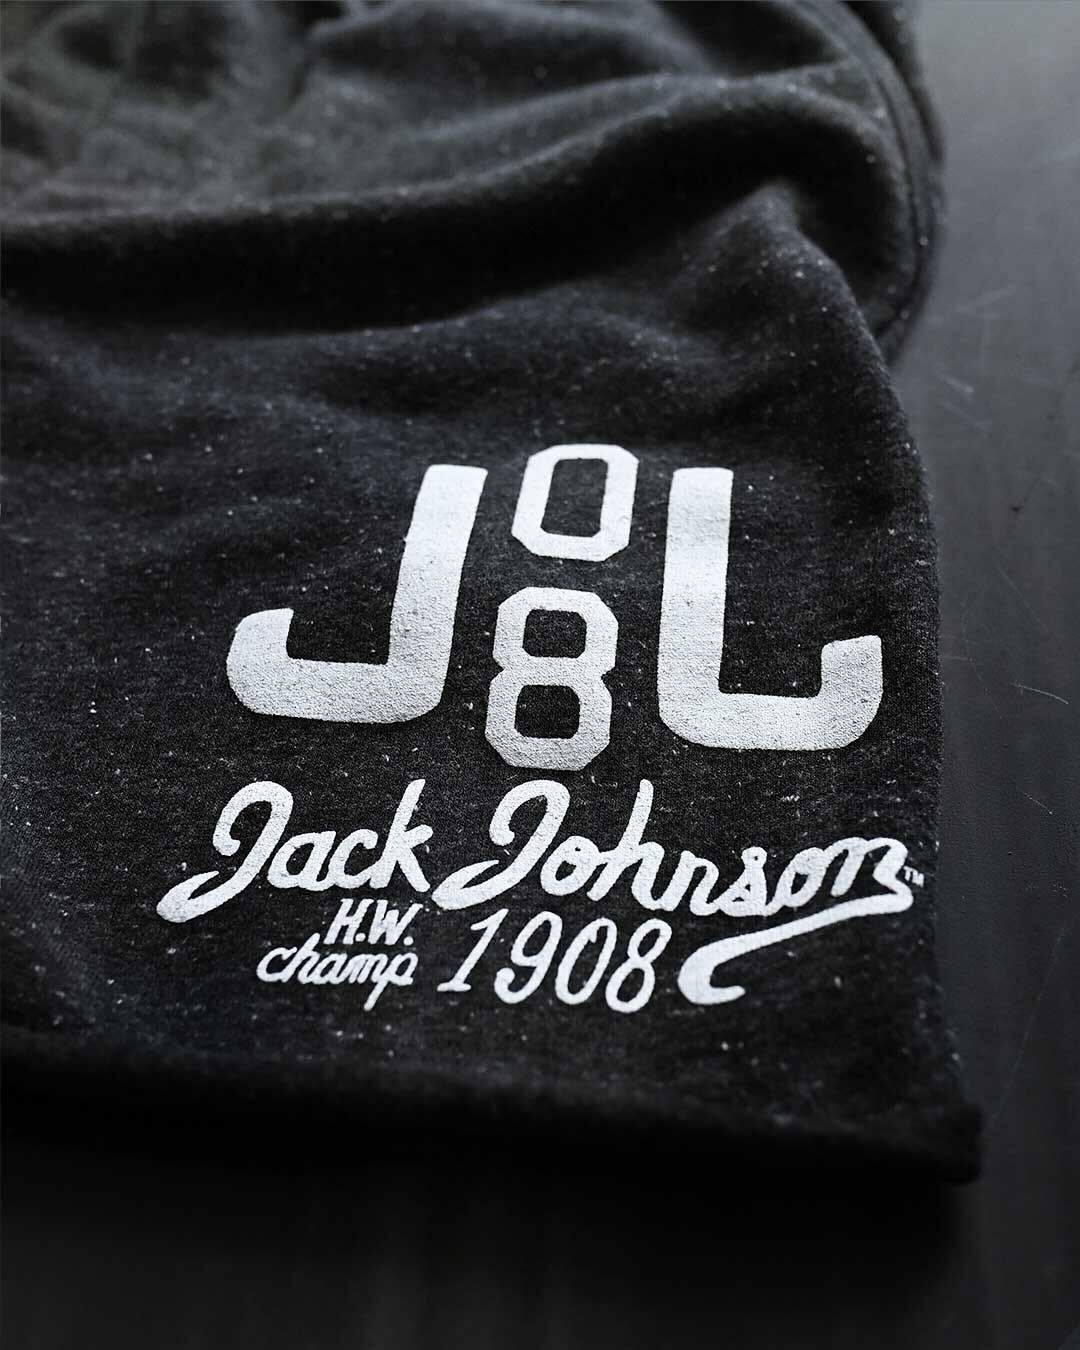 Jack Johnson 1908 Champ Black Shorts - Roots of Fight Canada